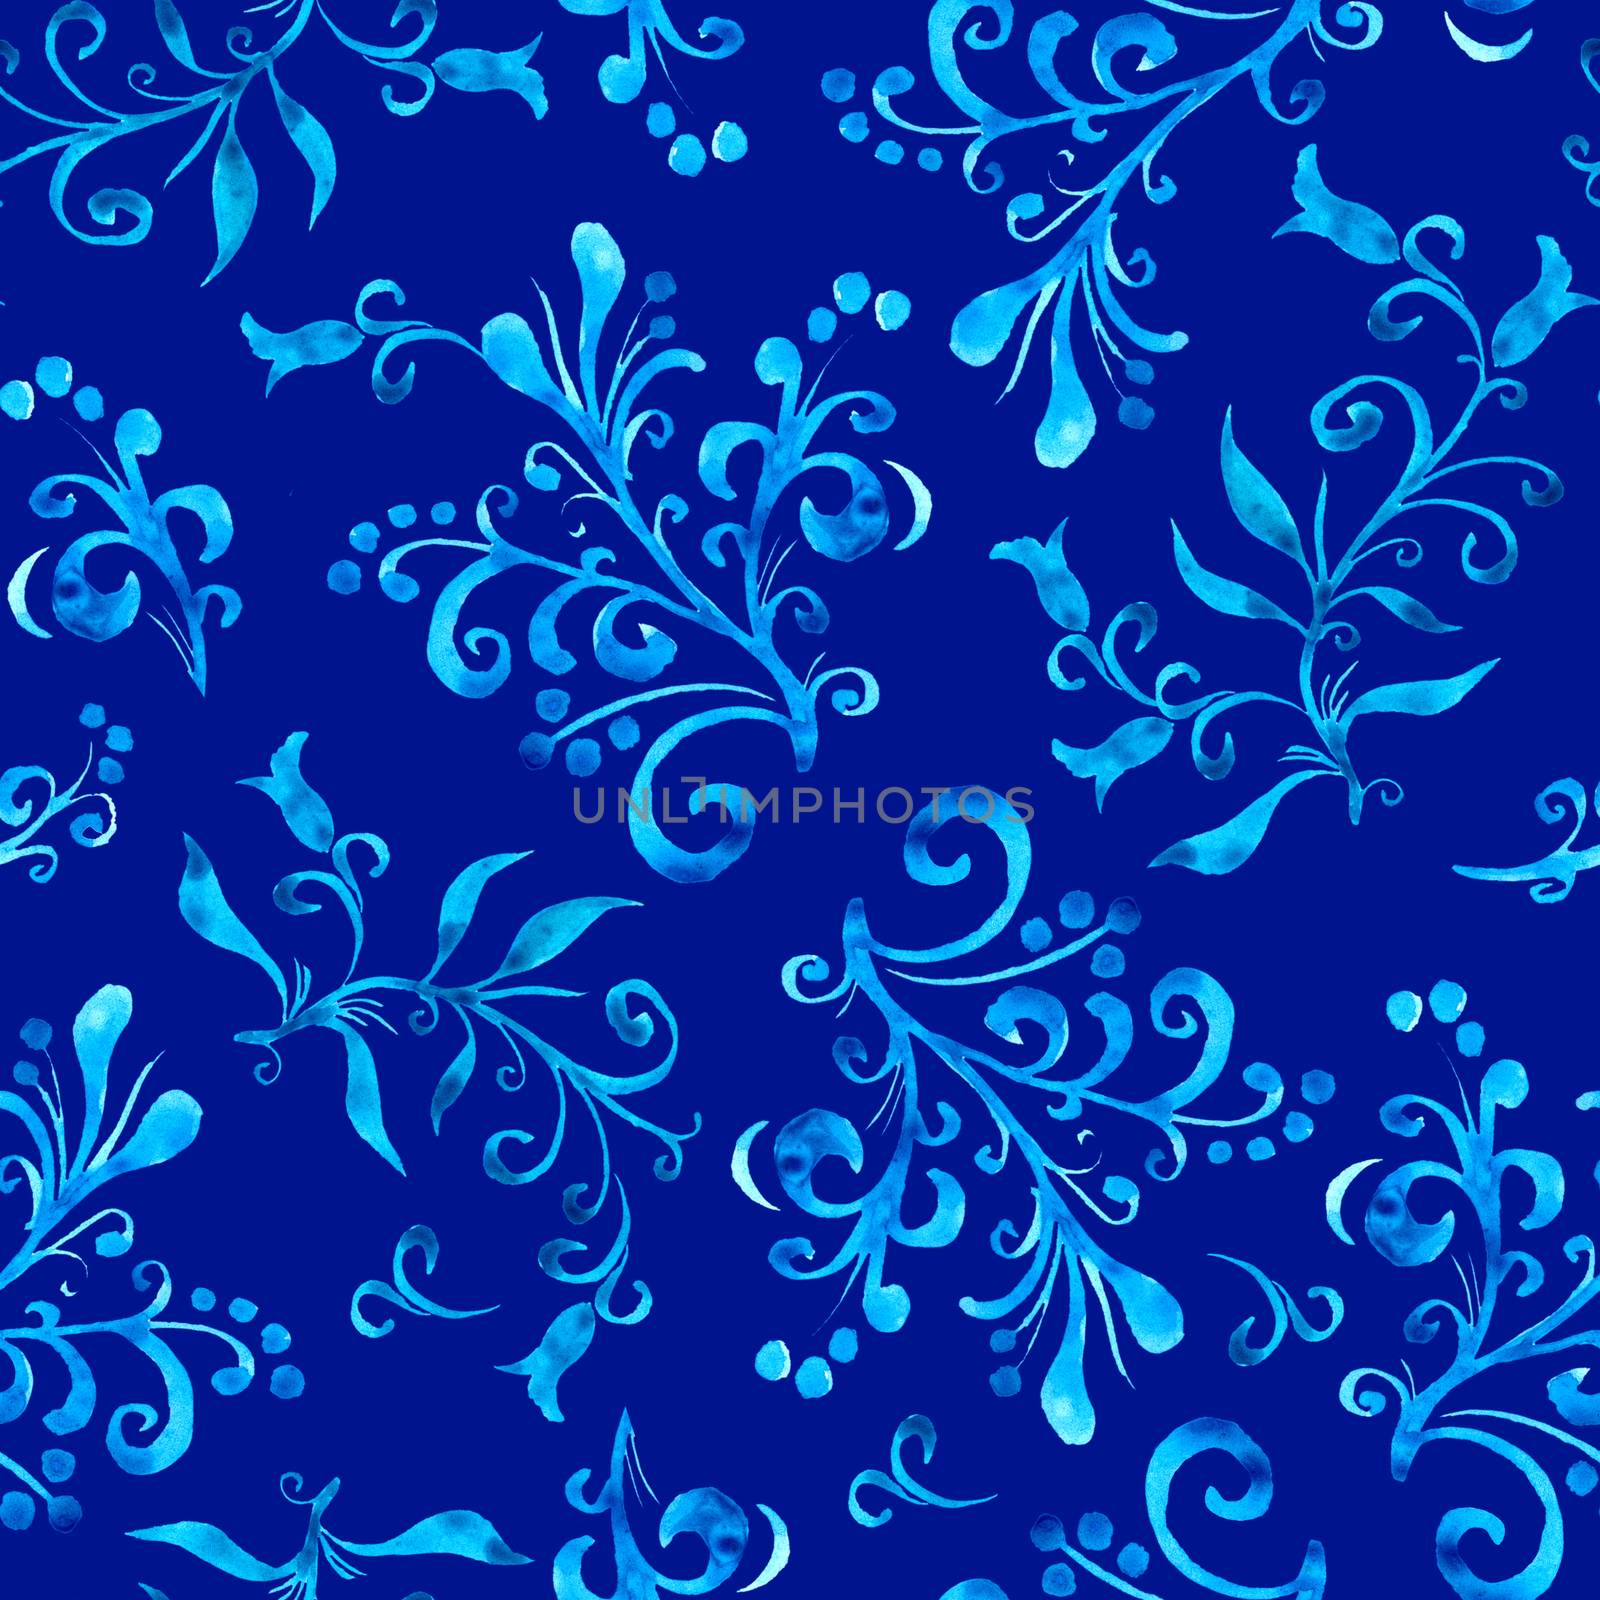 Floral seamless pattern with leaves and berries in blue by LanaLeta